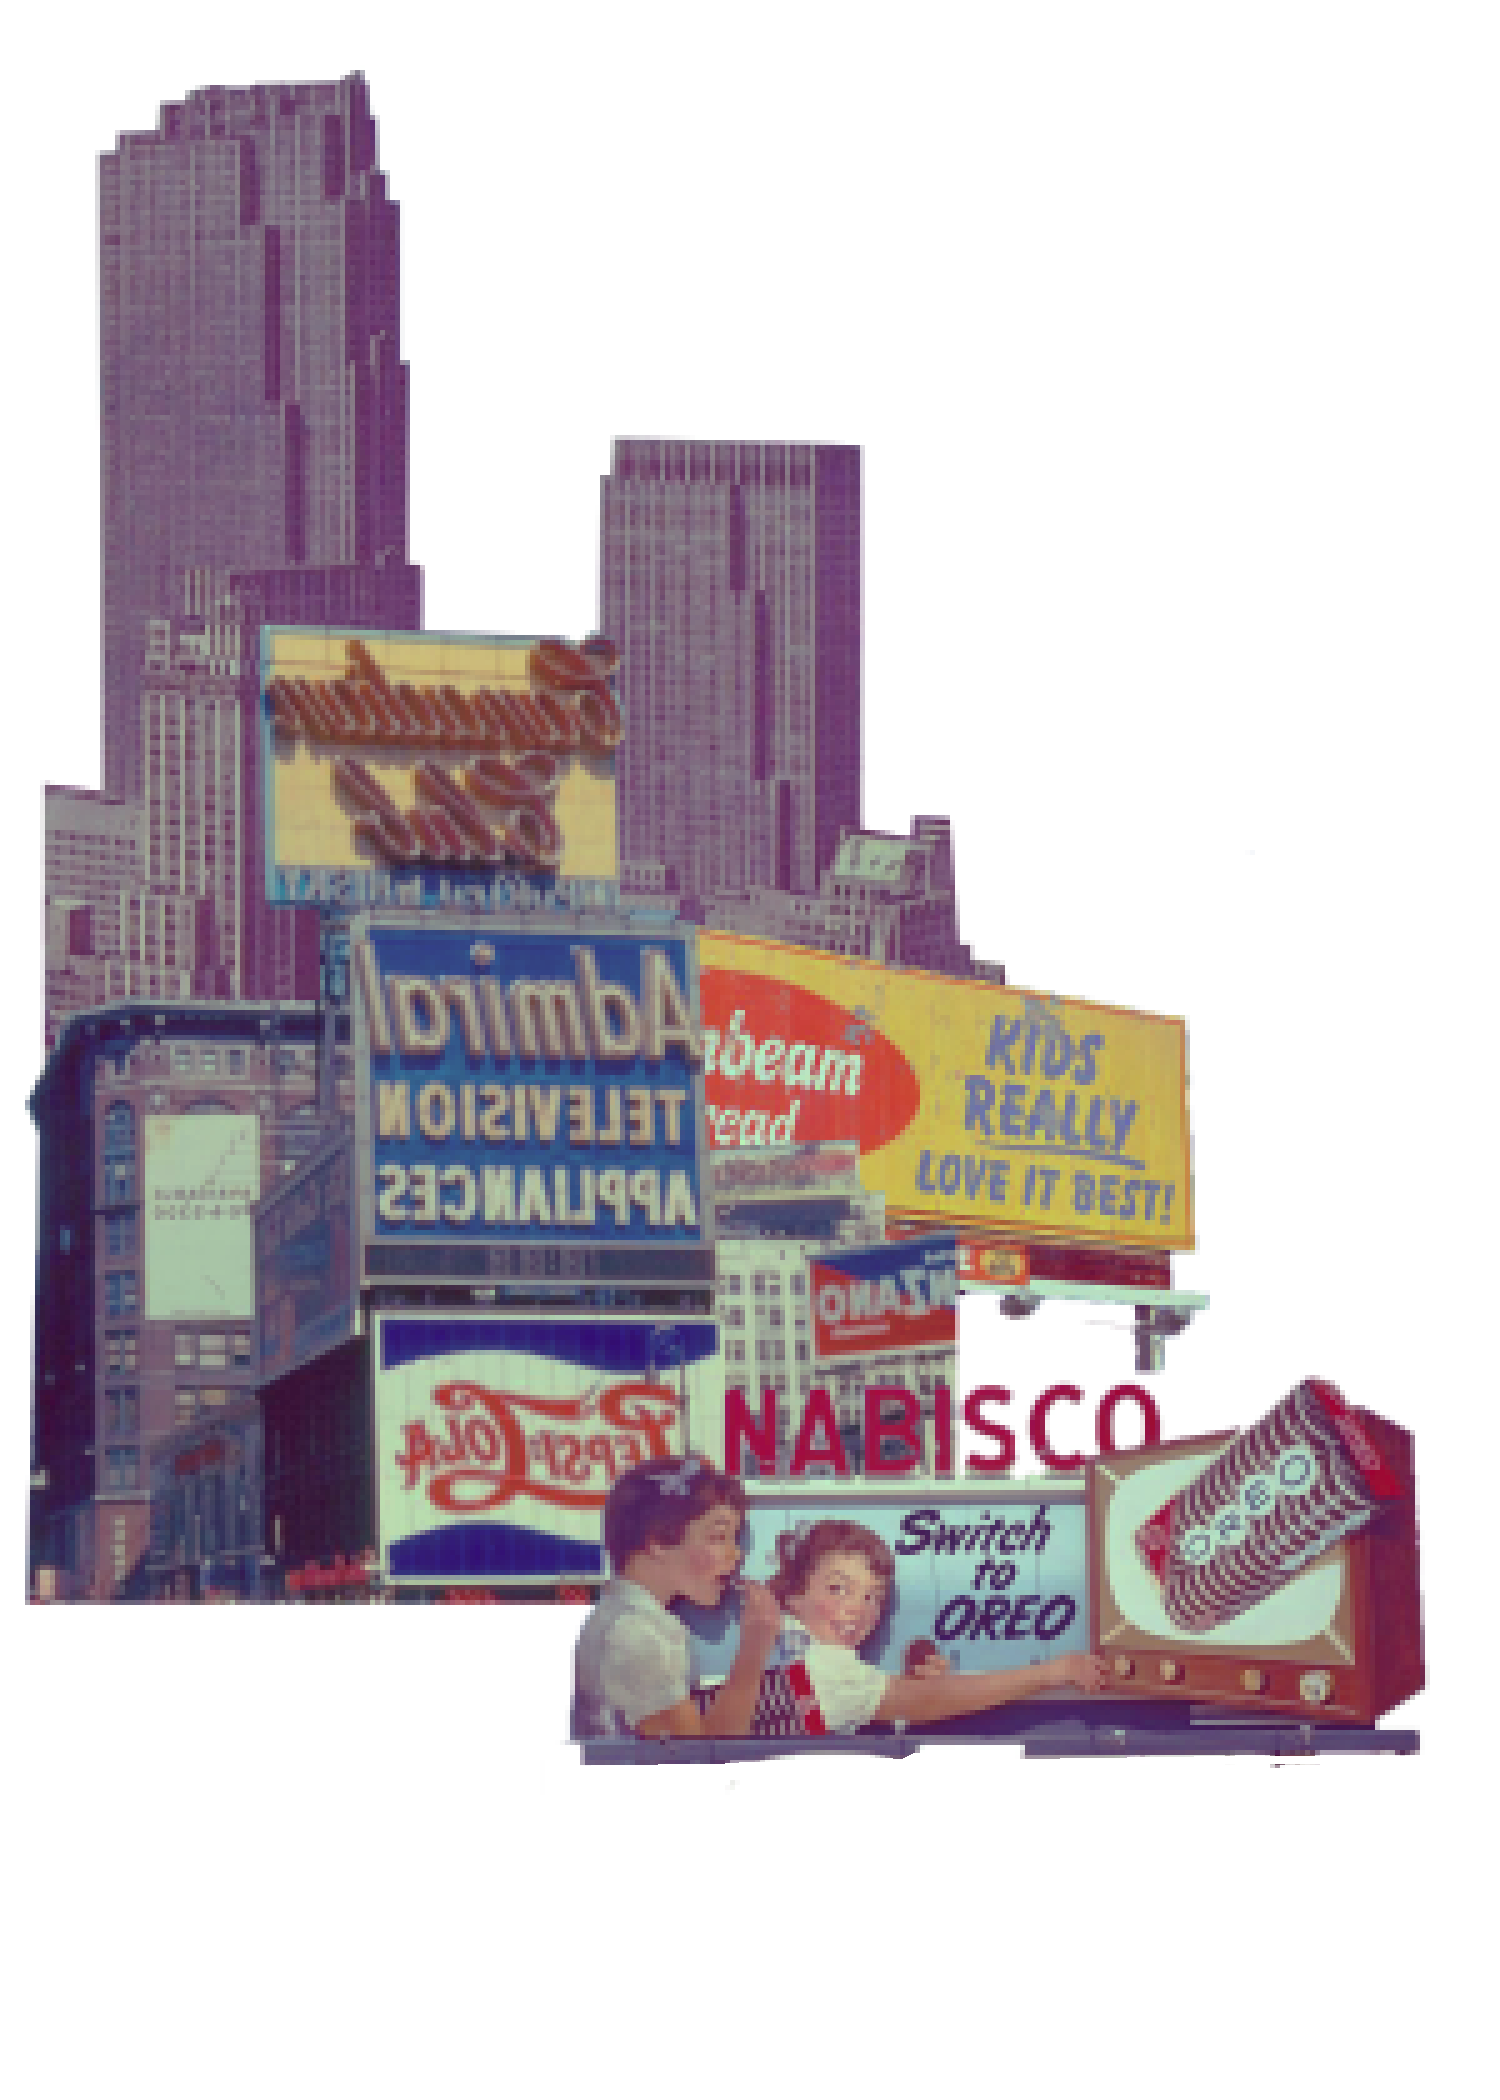 A series of collaged skyscrapers and vintage billboards make up an incomplete skyline.